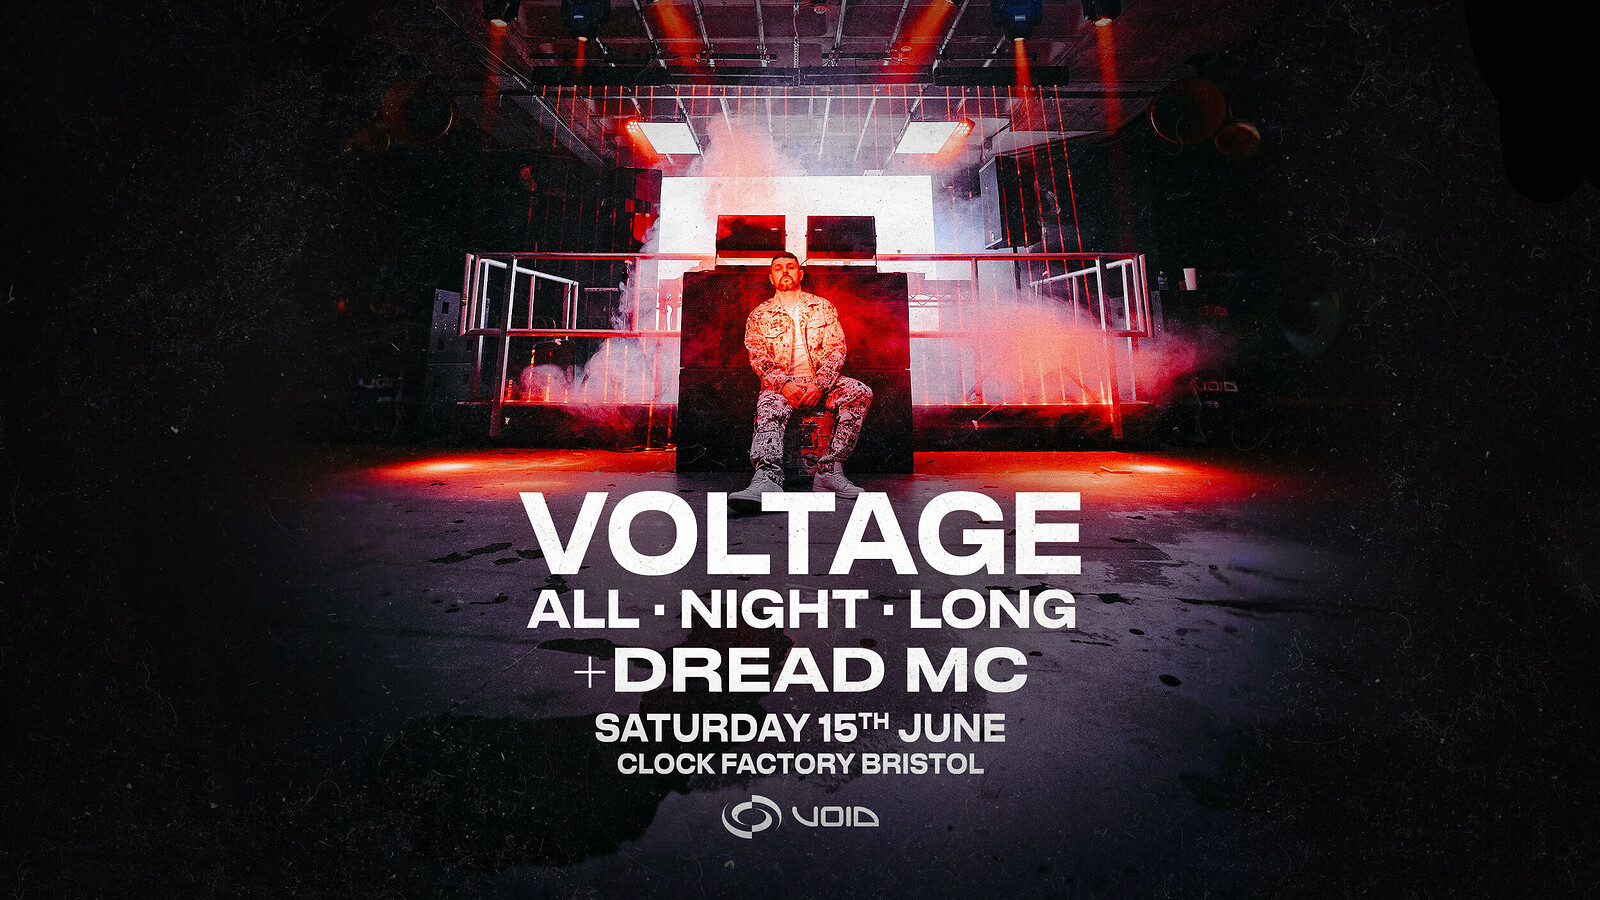 Voltage - All Night Long at Clock Factory